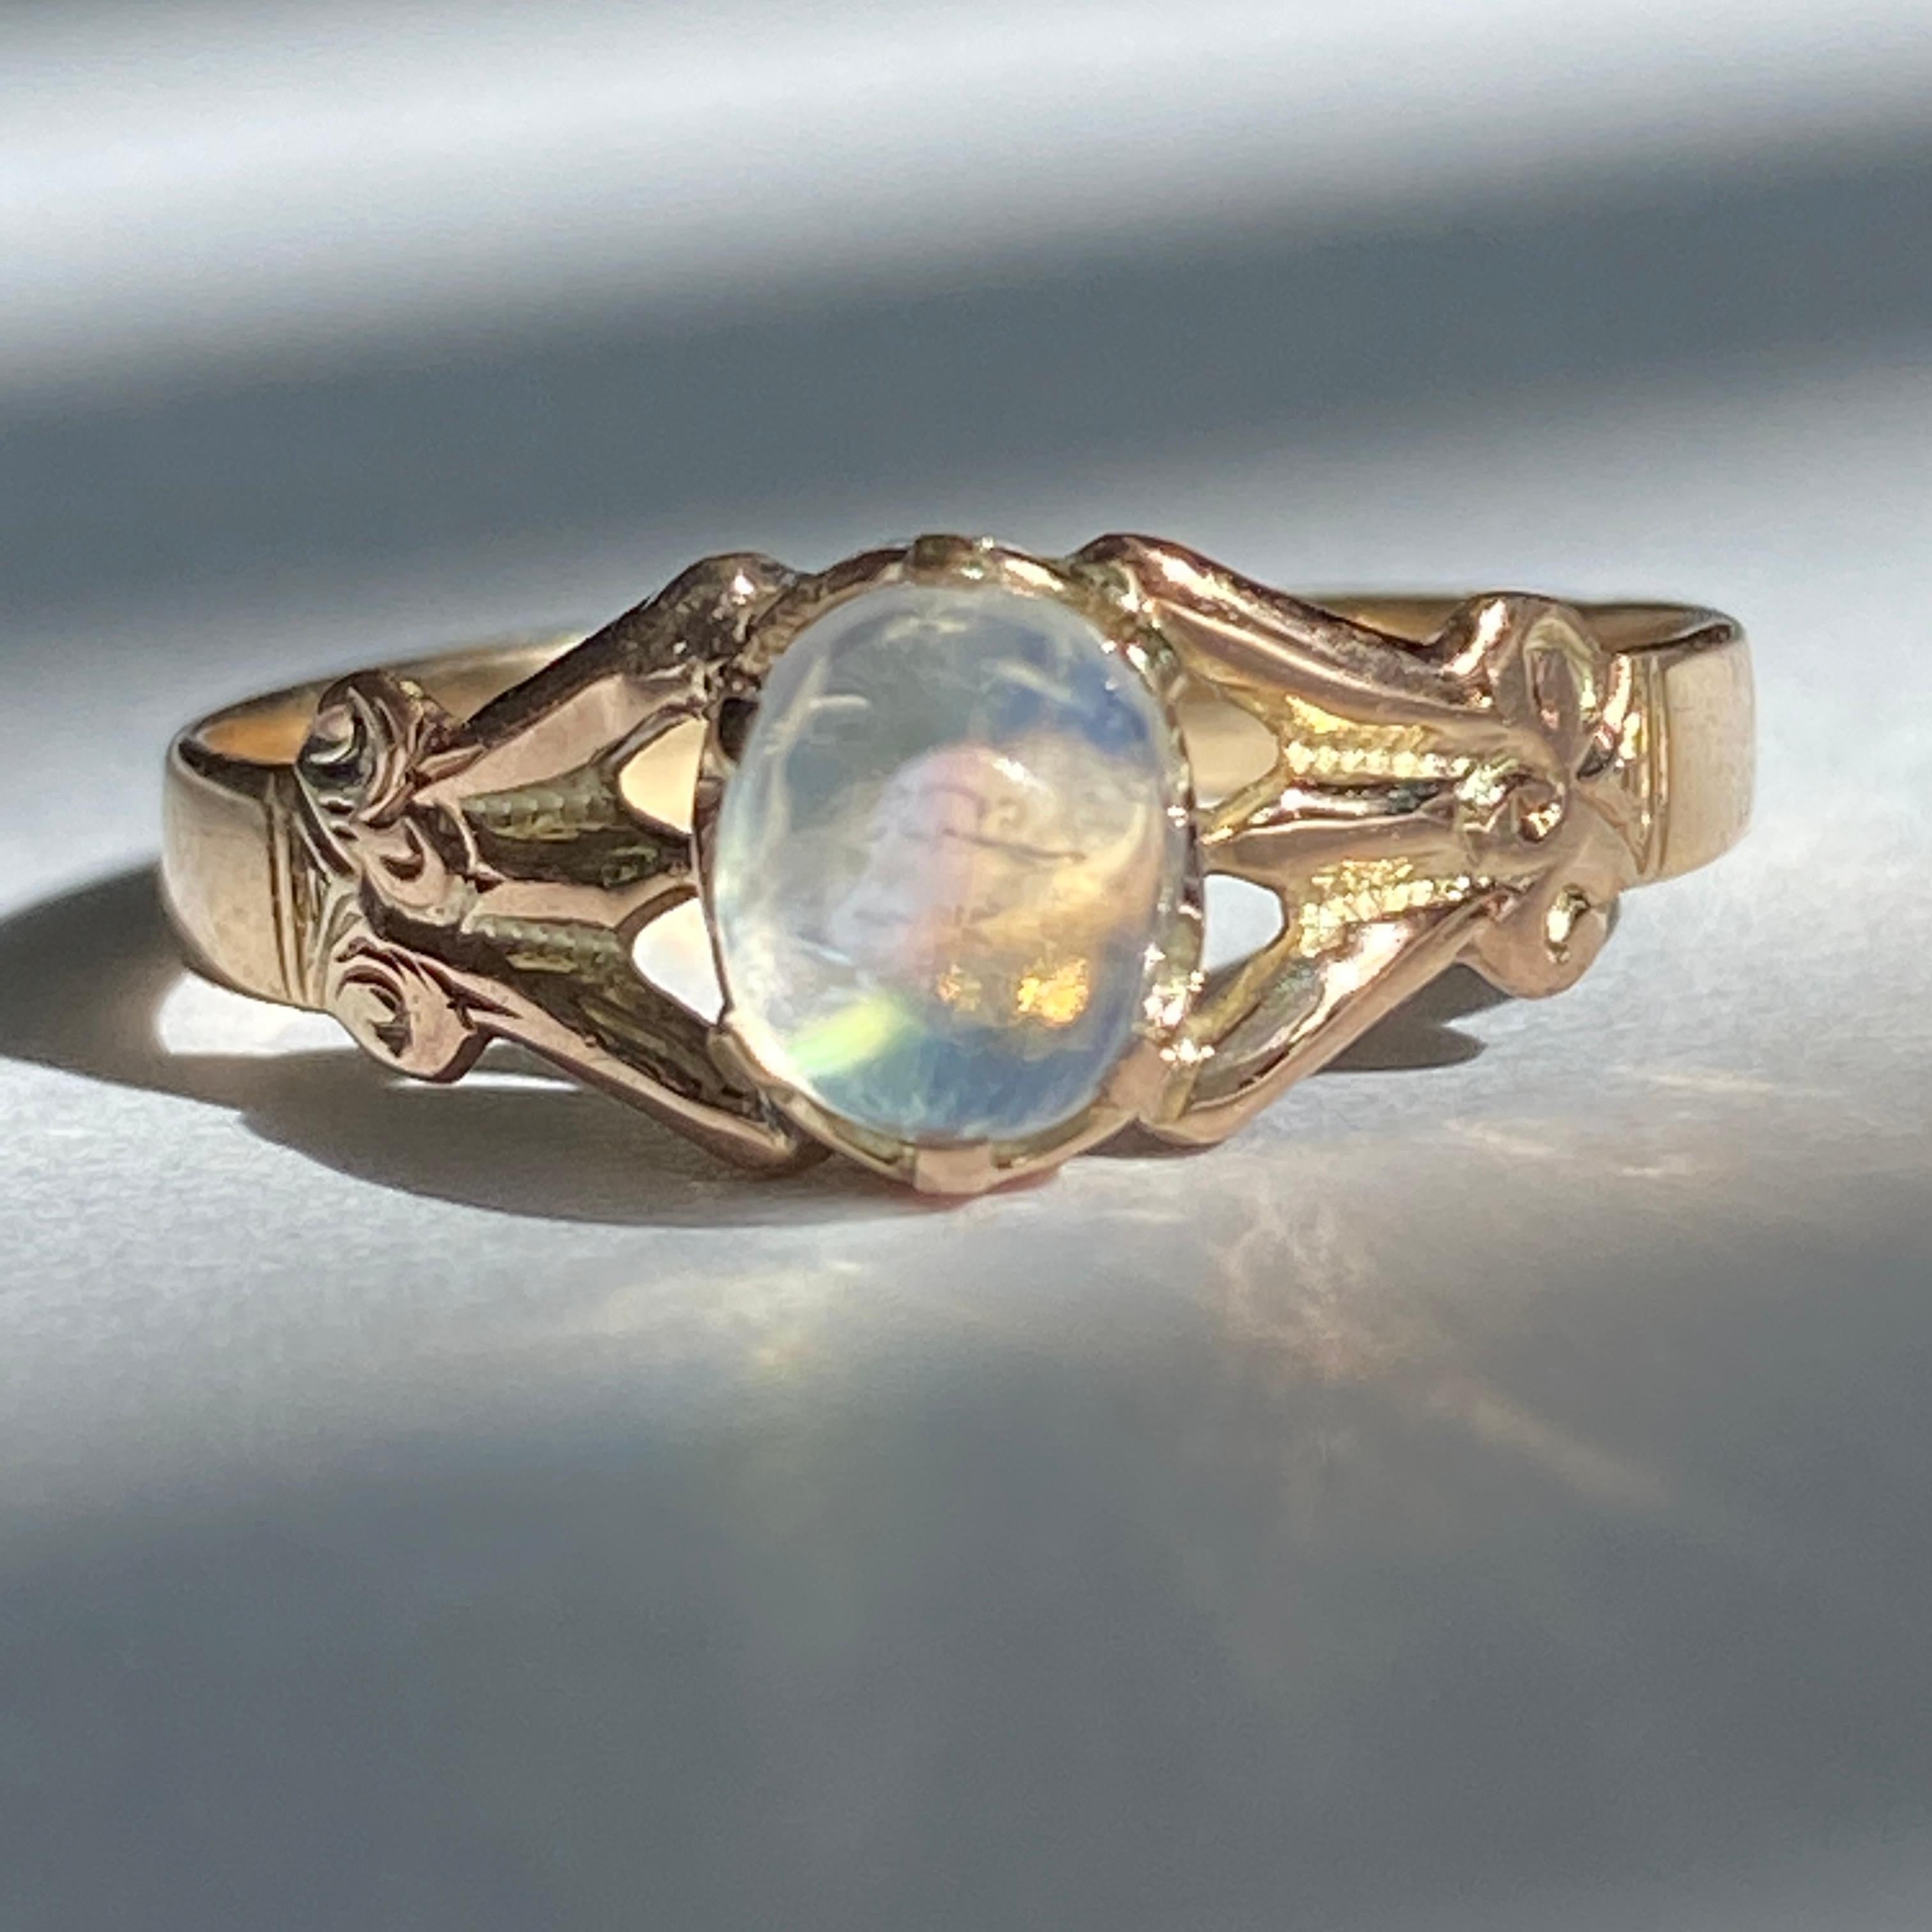 Details:
Super sweet Victorian ring with a bright moonstone orb. The ring is 14K rose gold, and has a lovely engraved pattern sounding the setting. There is one 5mm x 6mm cabochon moonstone with a pretty bright blue flare. Please ask all necessary